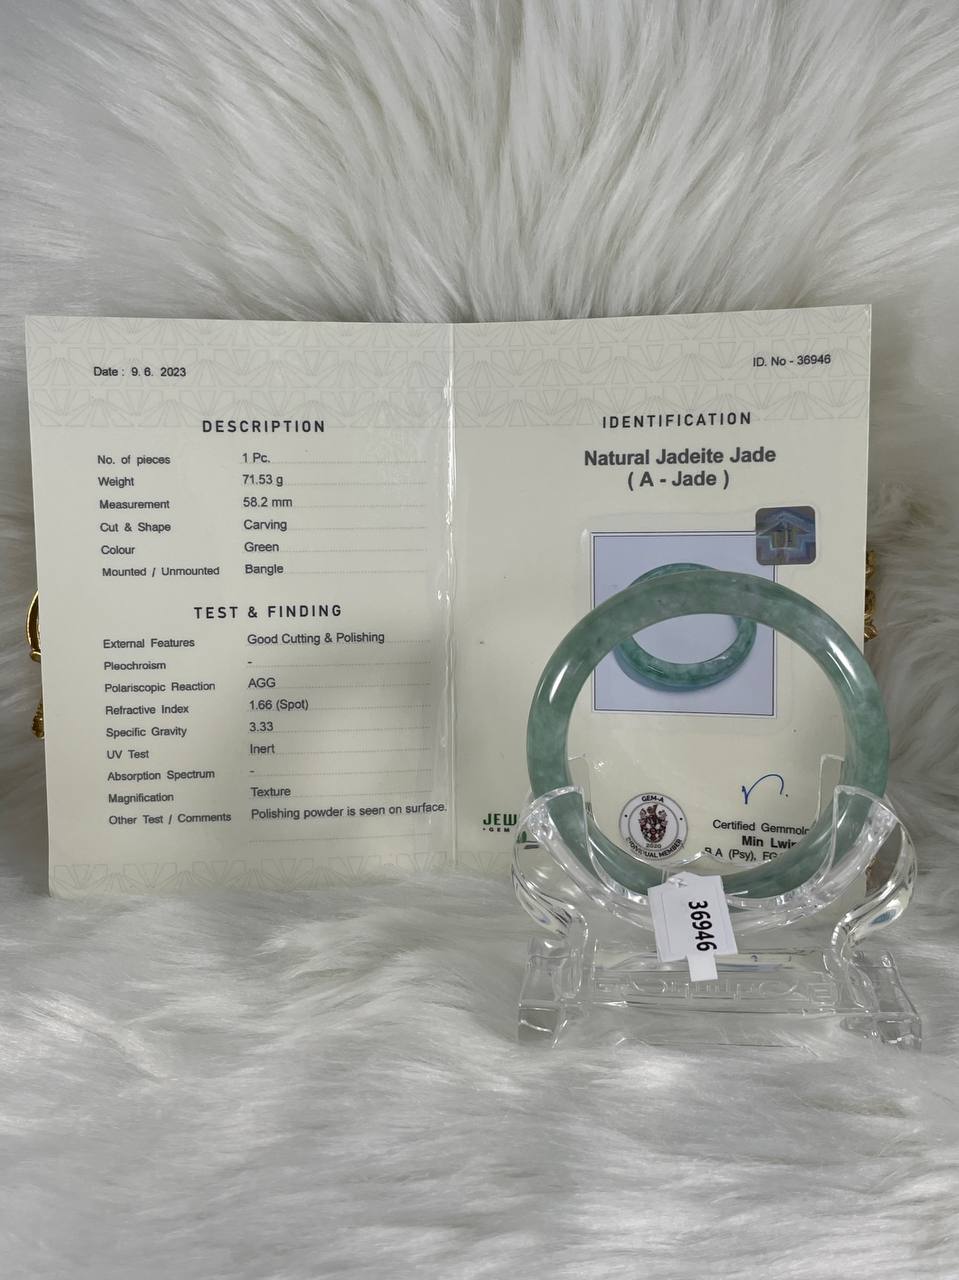 Grade A Natural Jade Bangle with certificate #36946